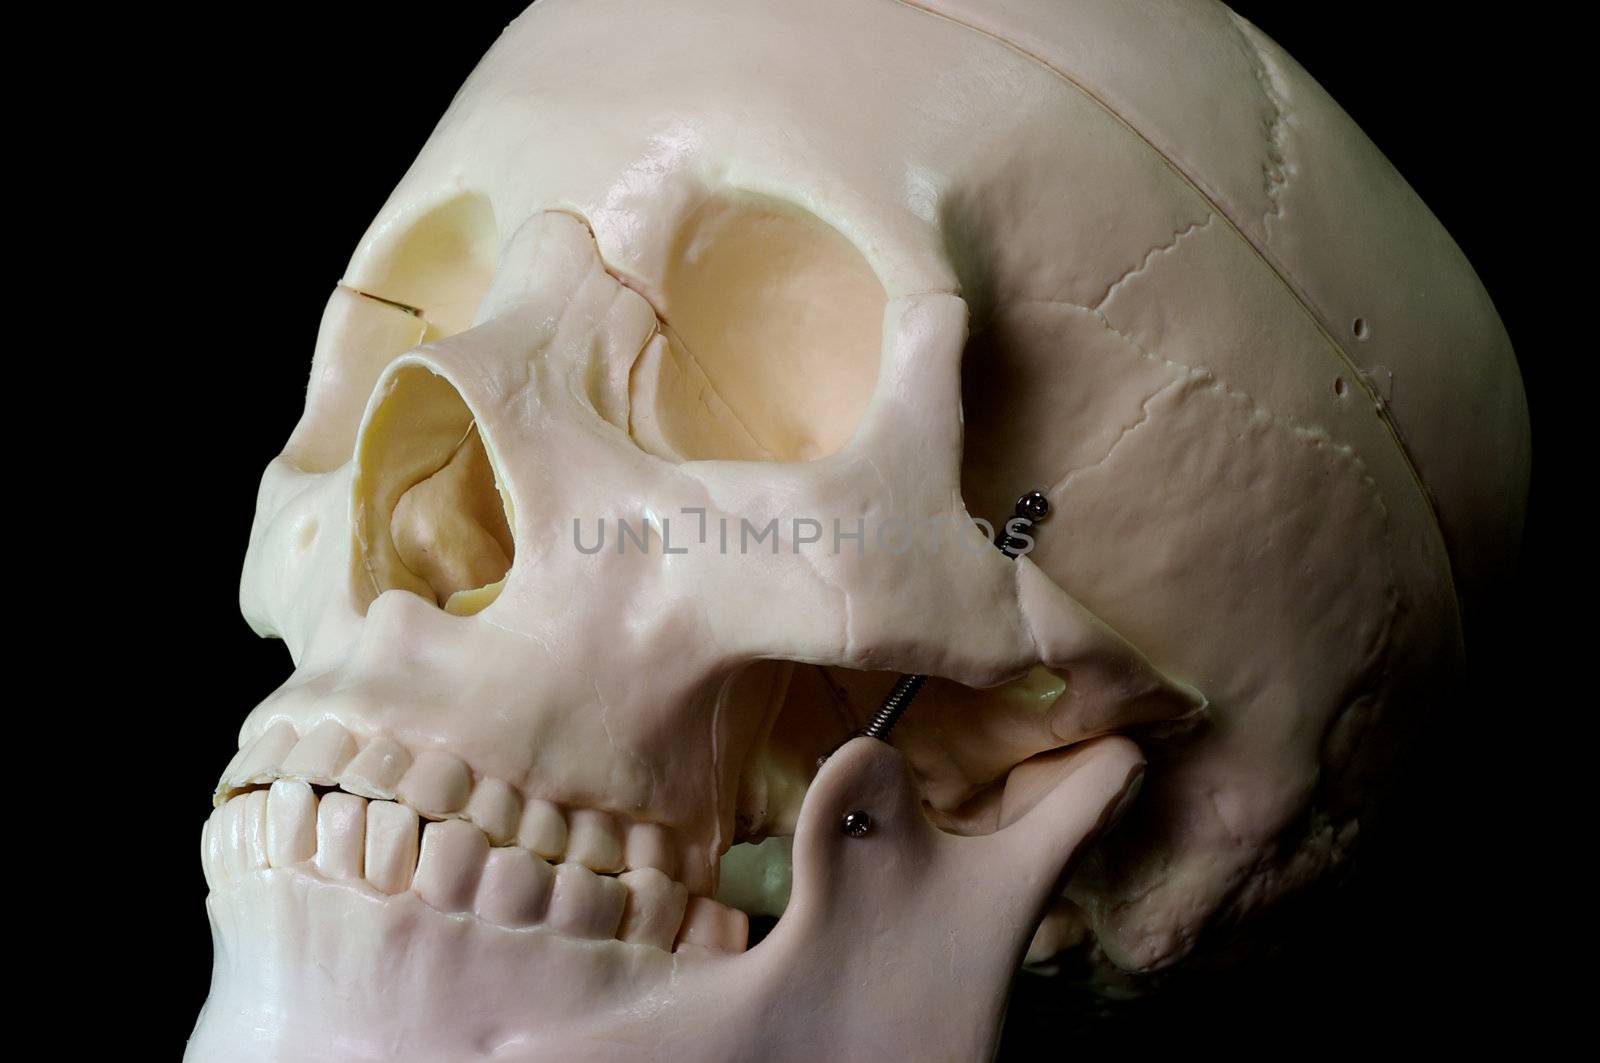 Medical learning skull laying on a black background